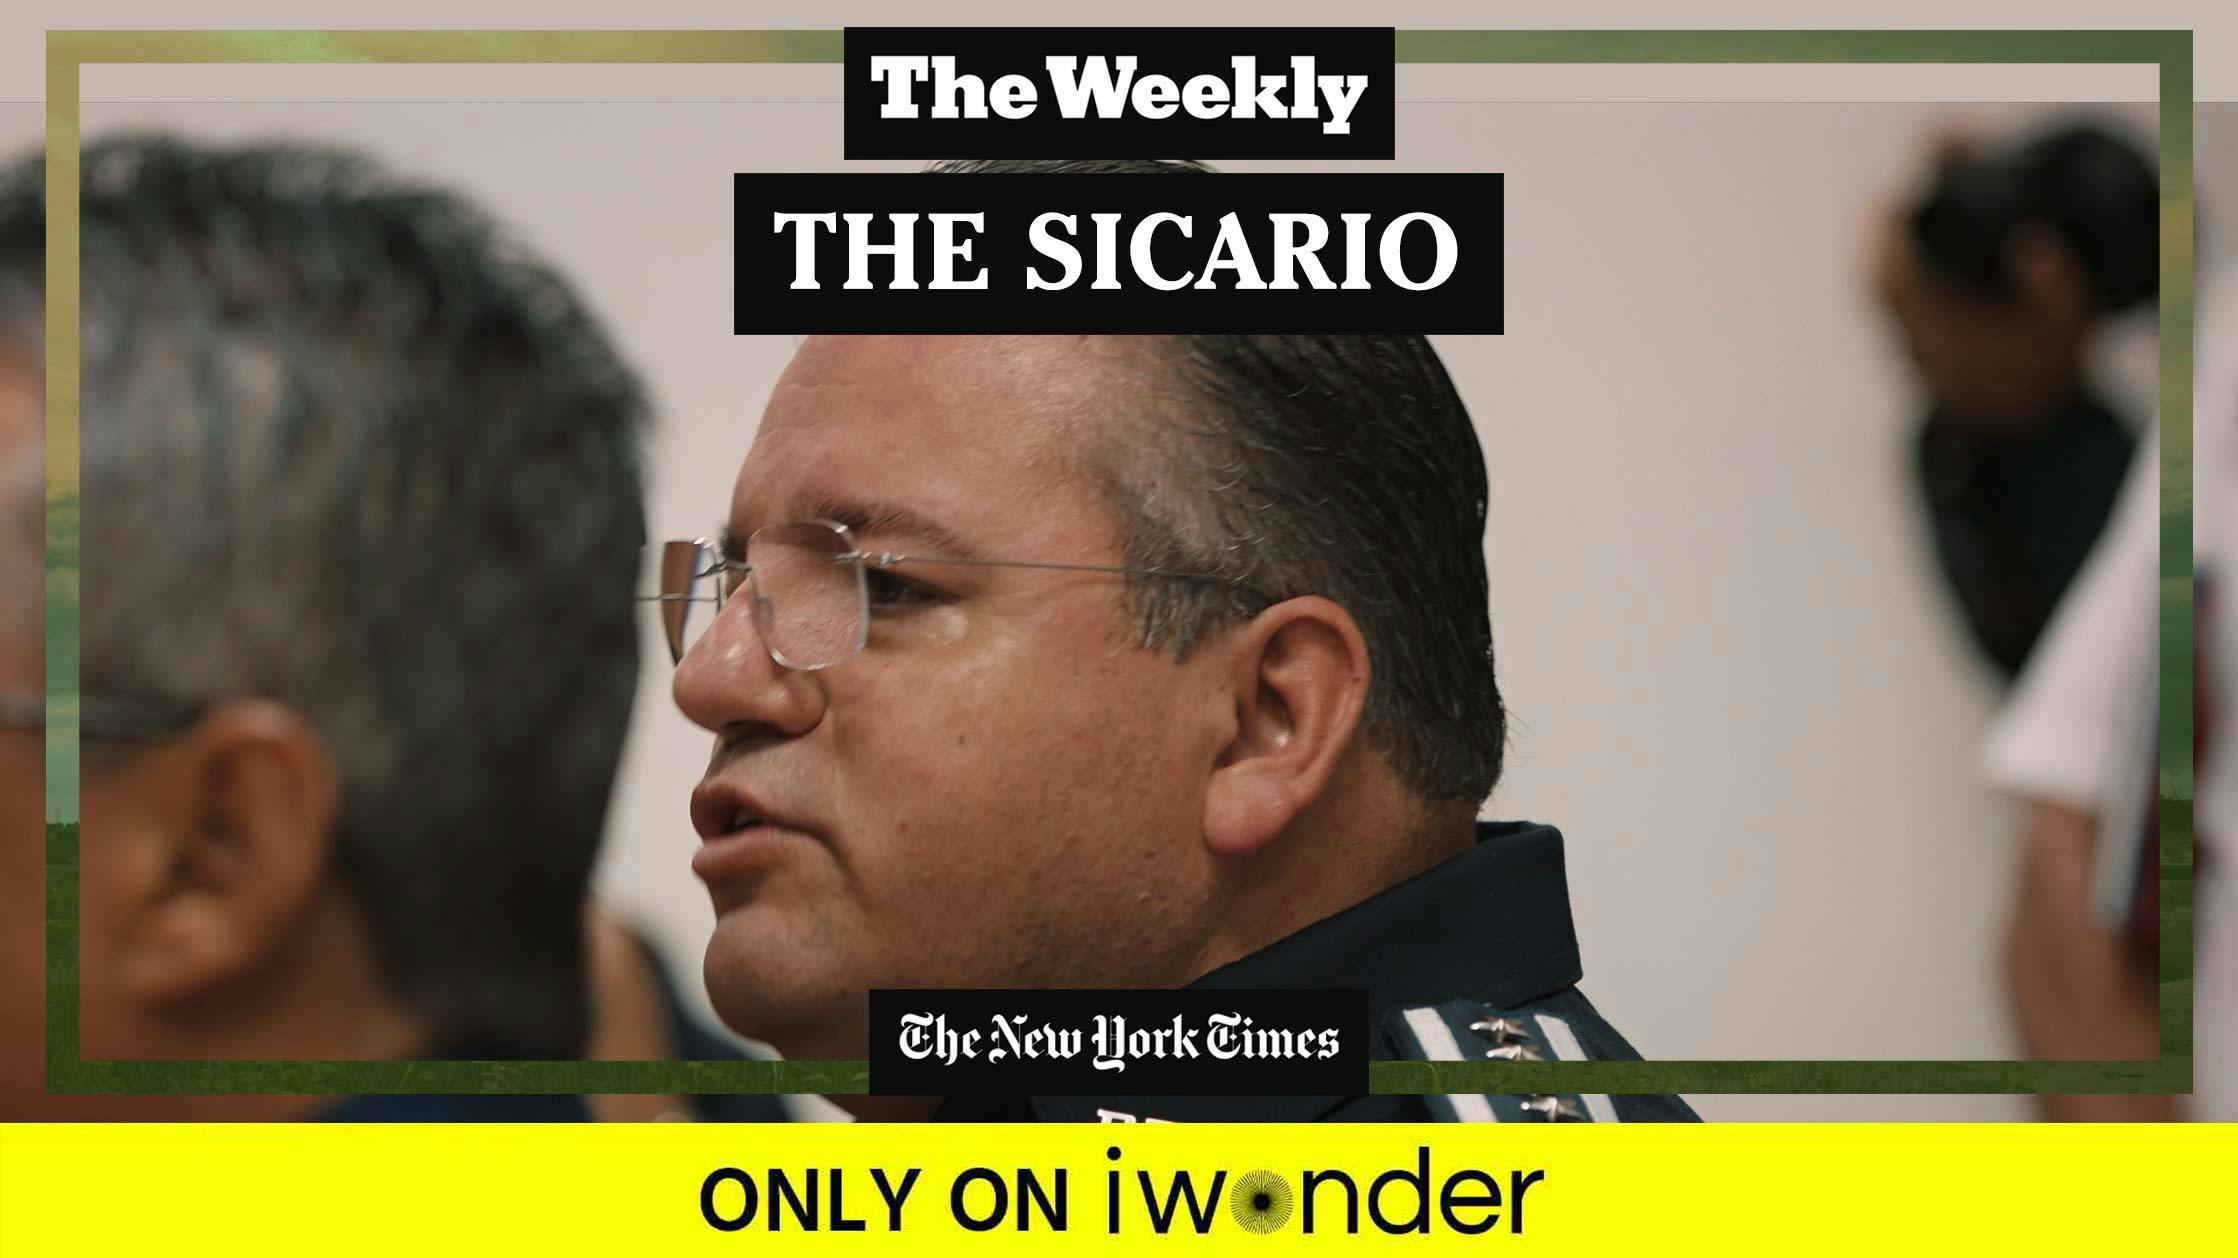 The Weekly: The Sicario